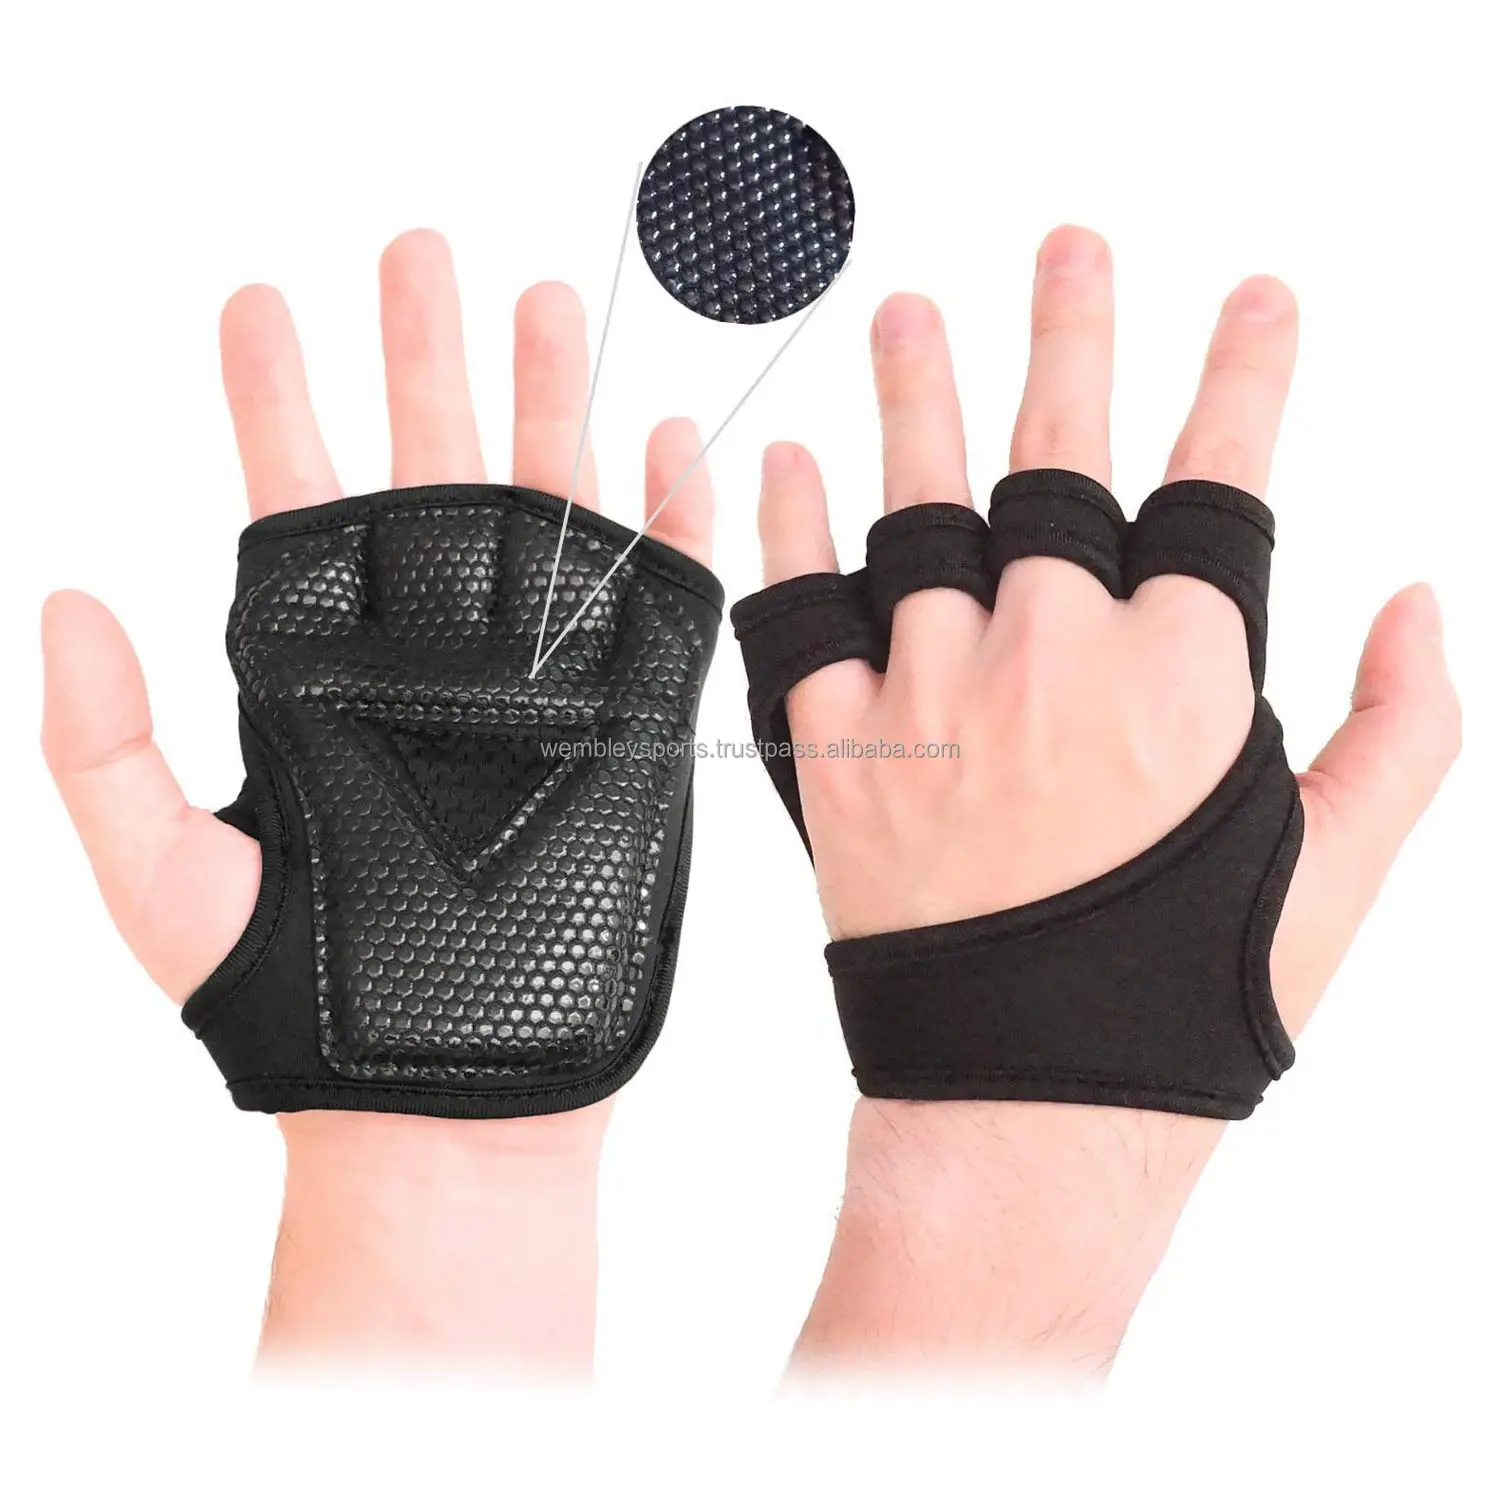 WeightLifting Workout Cross-fit Fitness Gloves, Callus-Guard Gym Barehand Grip Support Alpha Cross-Training Rowing Power Lifting